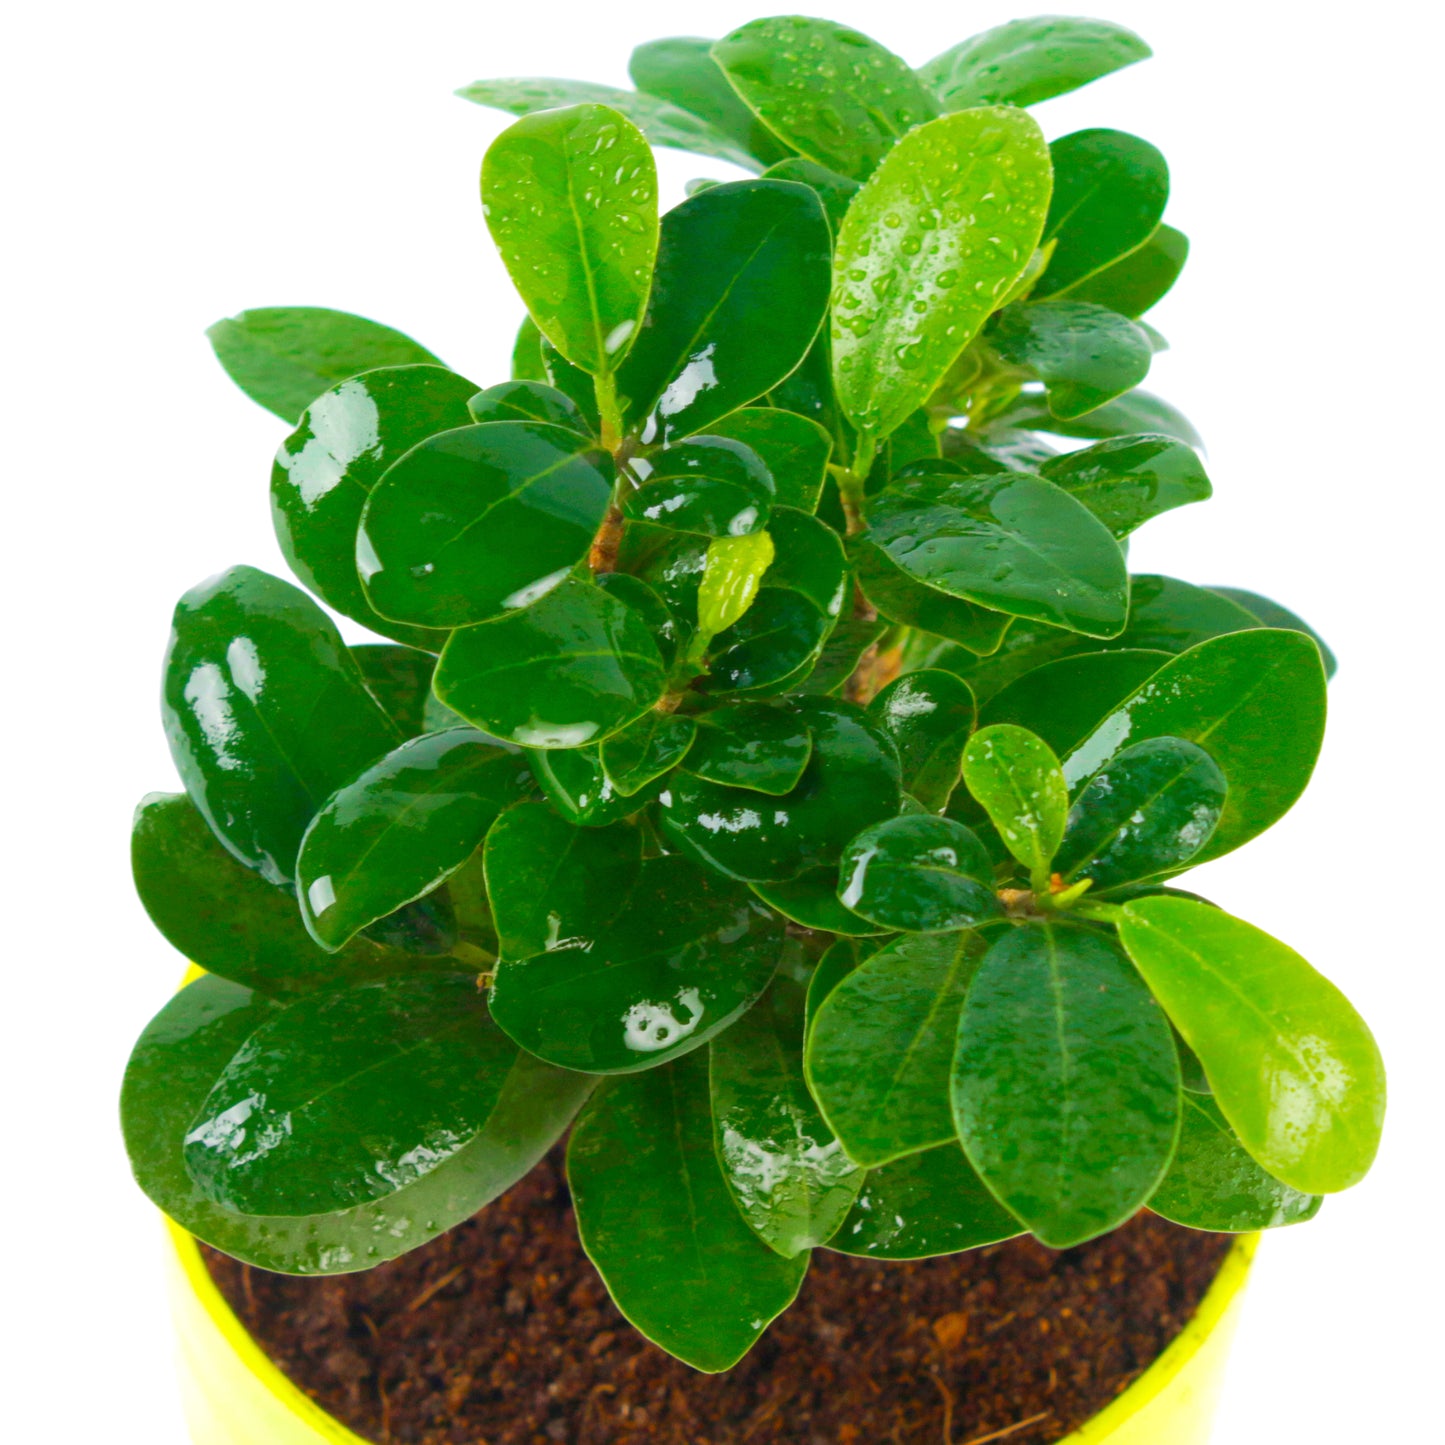 Ficus compacta Live Plant with Yellow and White Plastic Pot